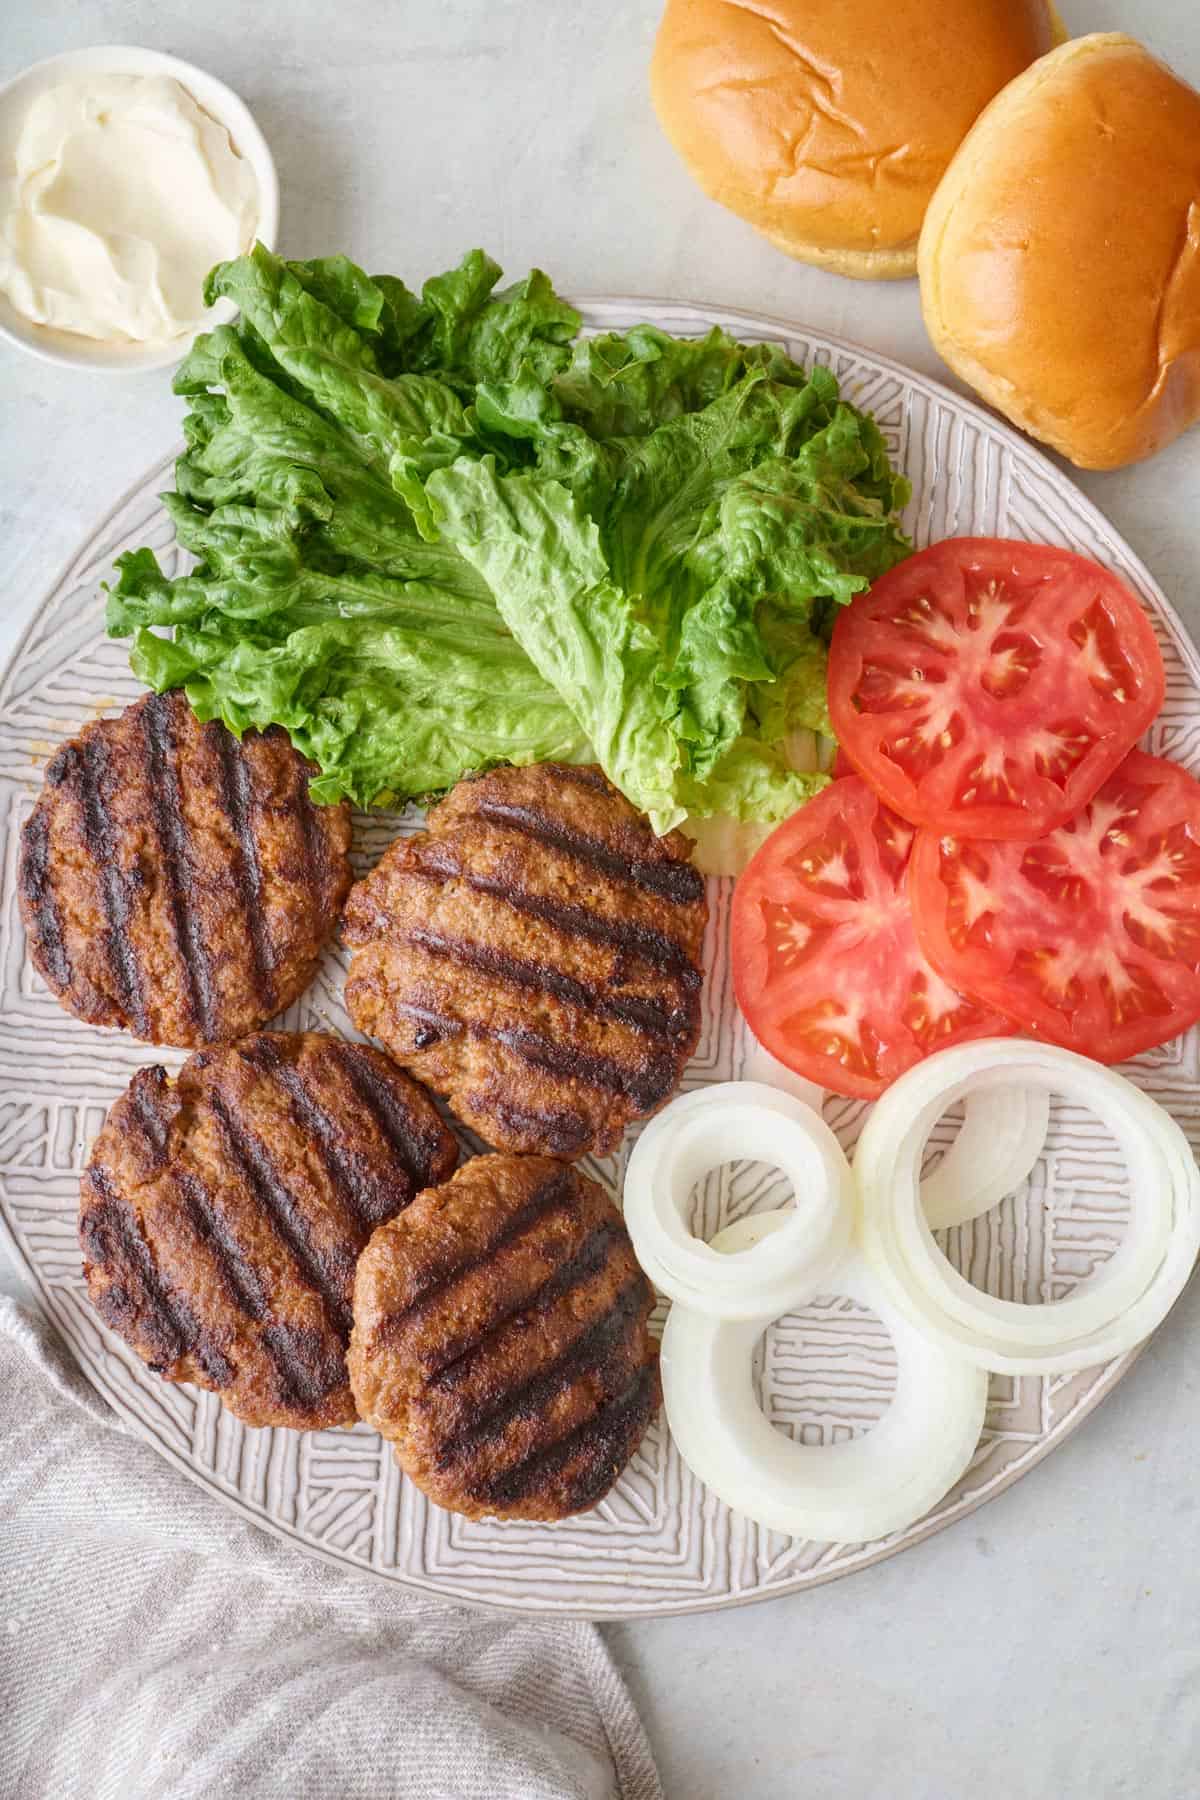 Platter of grilled hamburger patties, lettuce, sliced tomatoes, and onions.